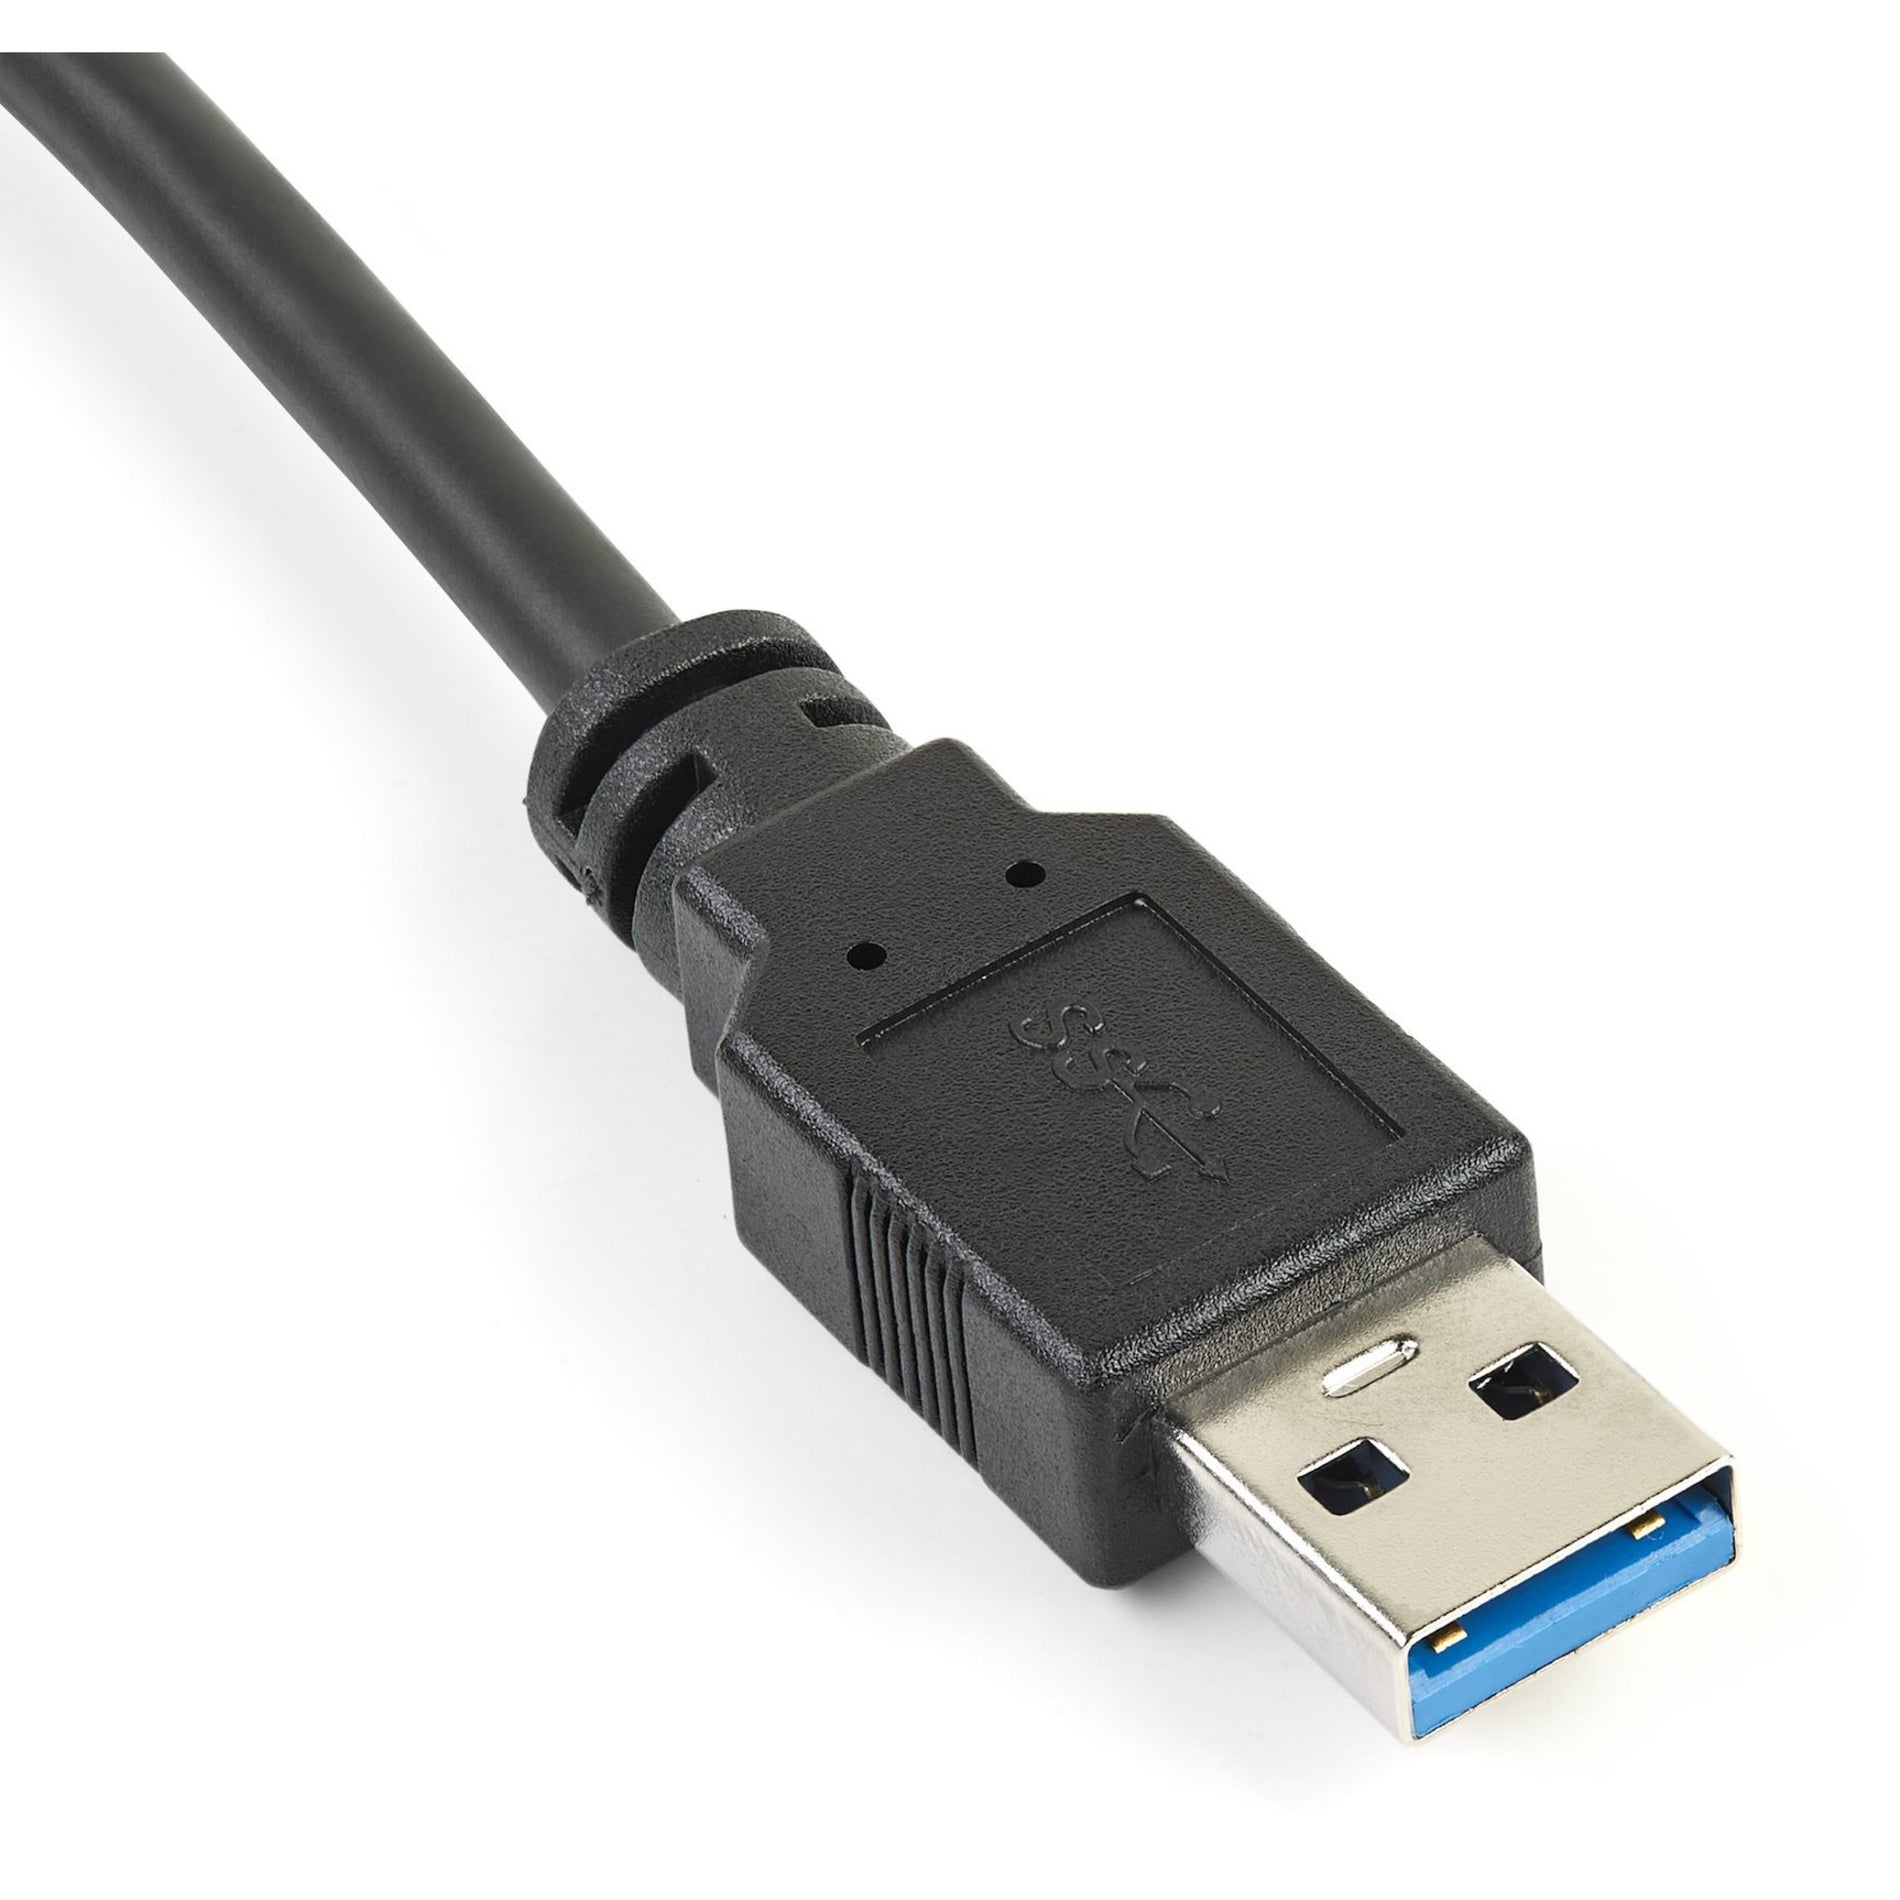 StarTech.com USB32VGAV USB 3.0 to VGA Video Adapter with On-board Driver Installation - 1920x1200, Easy Plug-and-Play Solution for Adding an Extra Display